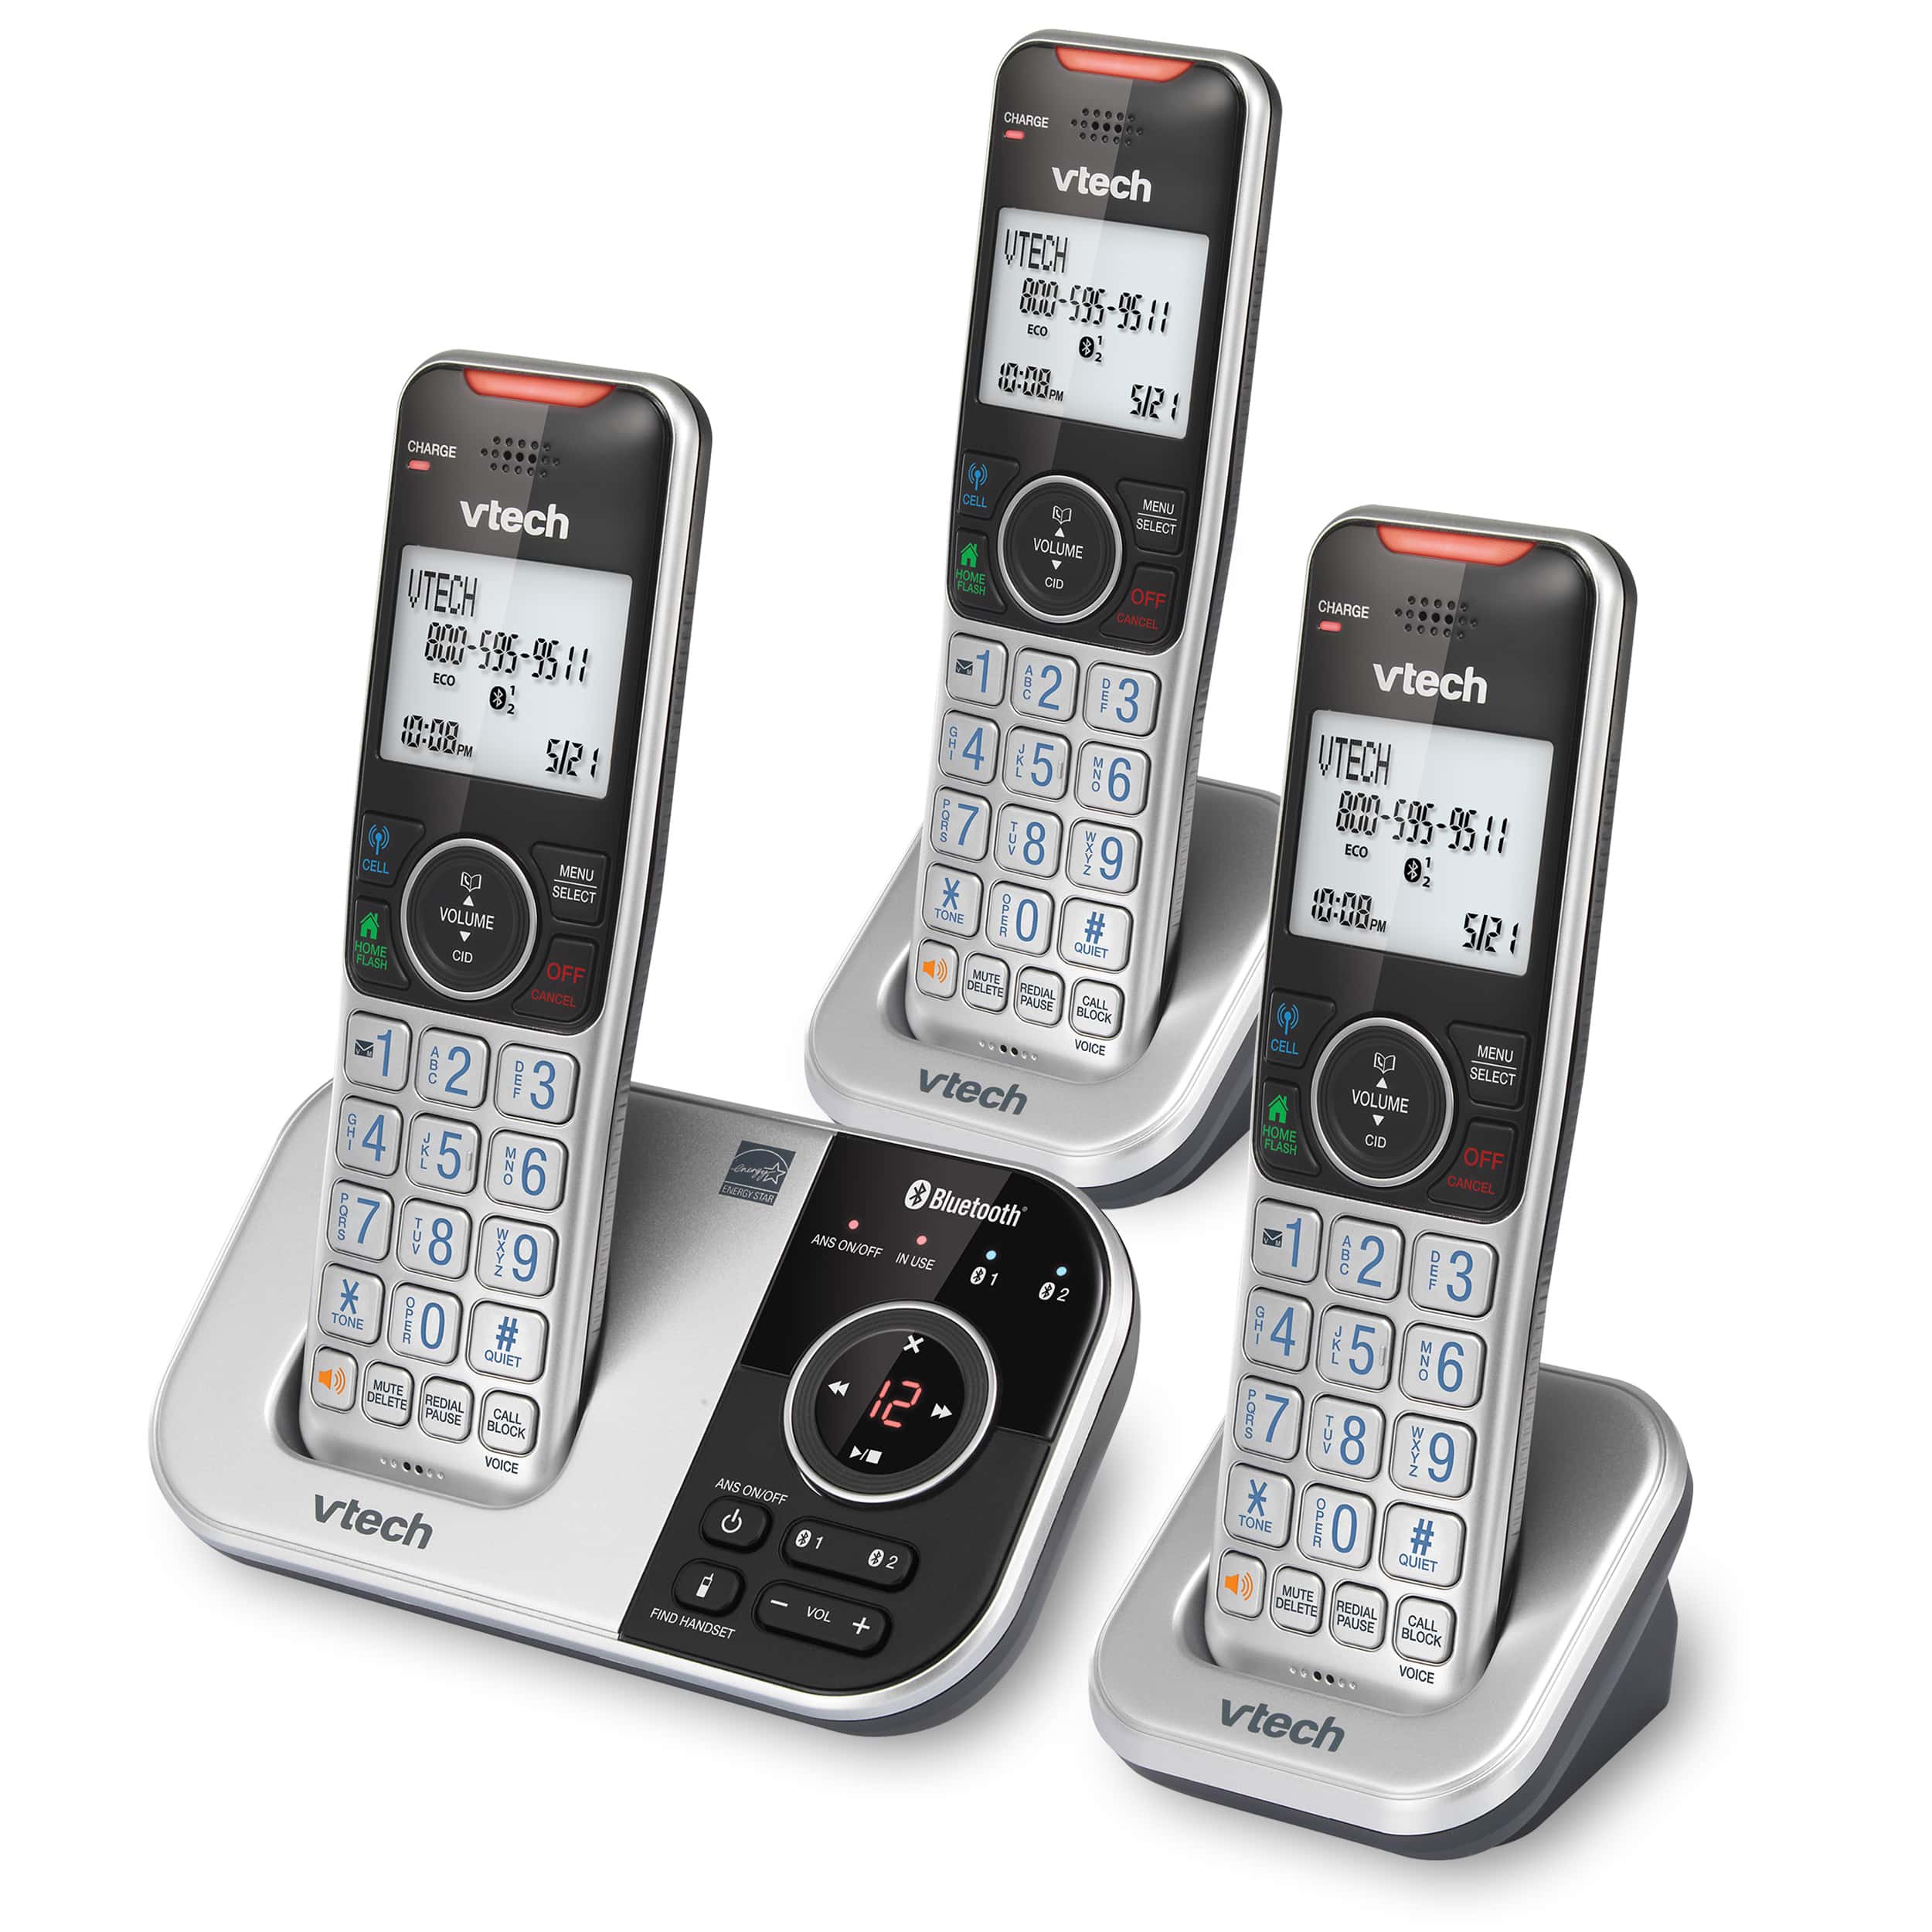 3-Handset Expandable Cordless Phone with Bluetooth Connect to Cell, Smart Call Blocker and Answering System (Silver & Black)